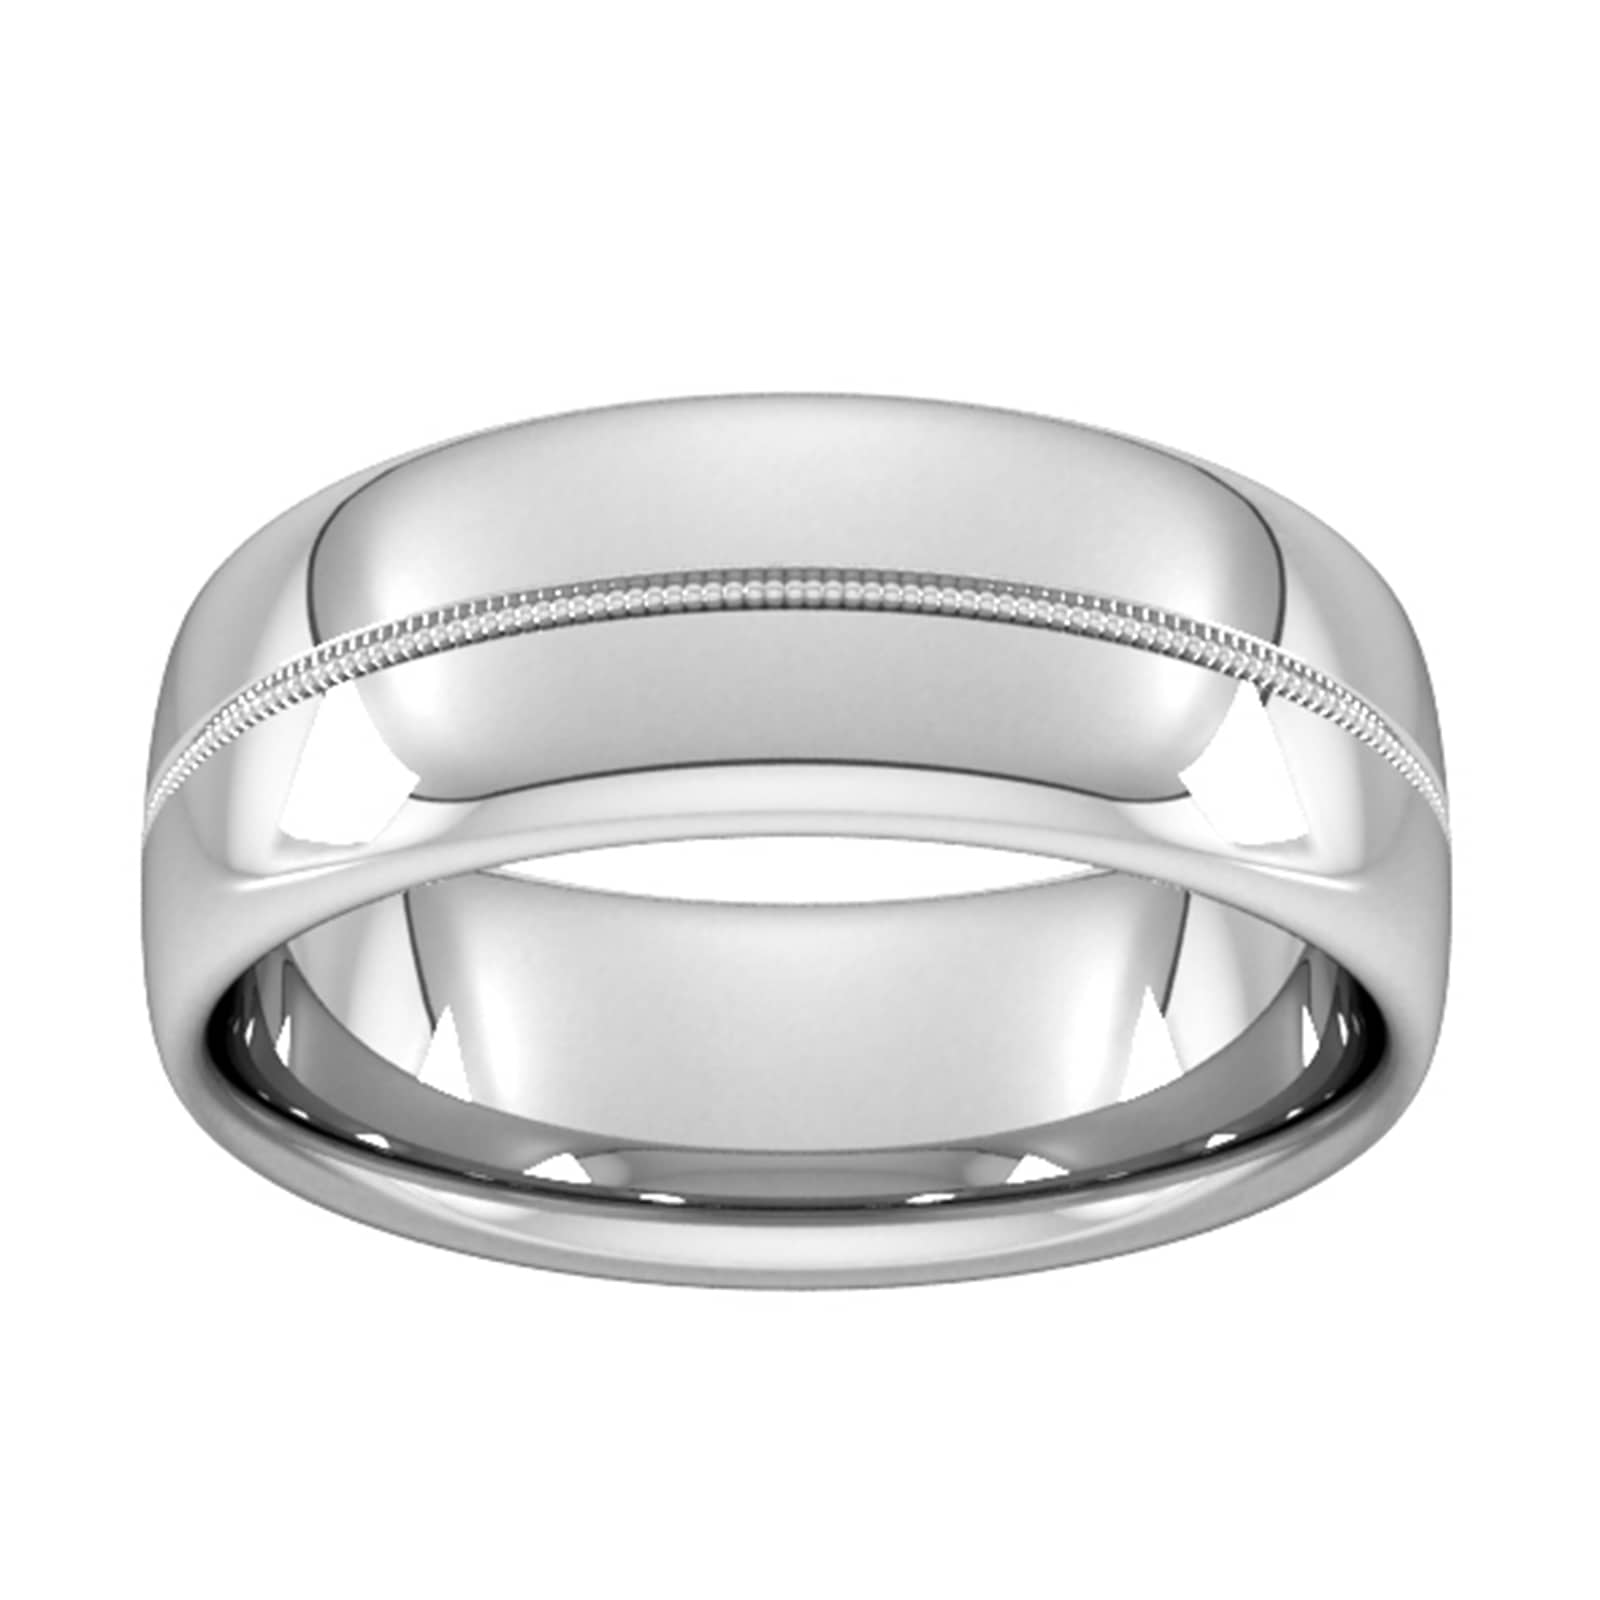 8mm traditional court heavy milgrain centre wedding ring in 9 carat white gold - ring size j